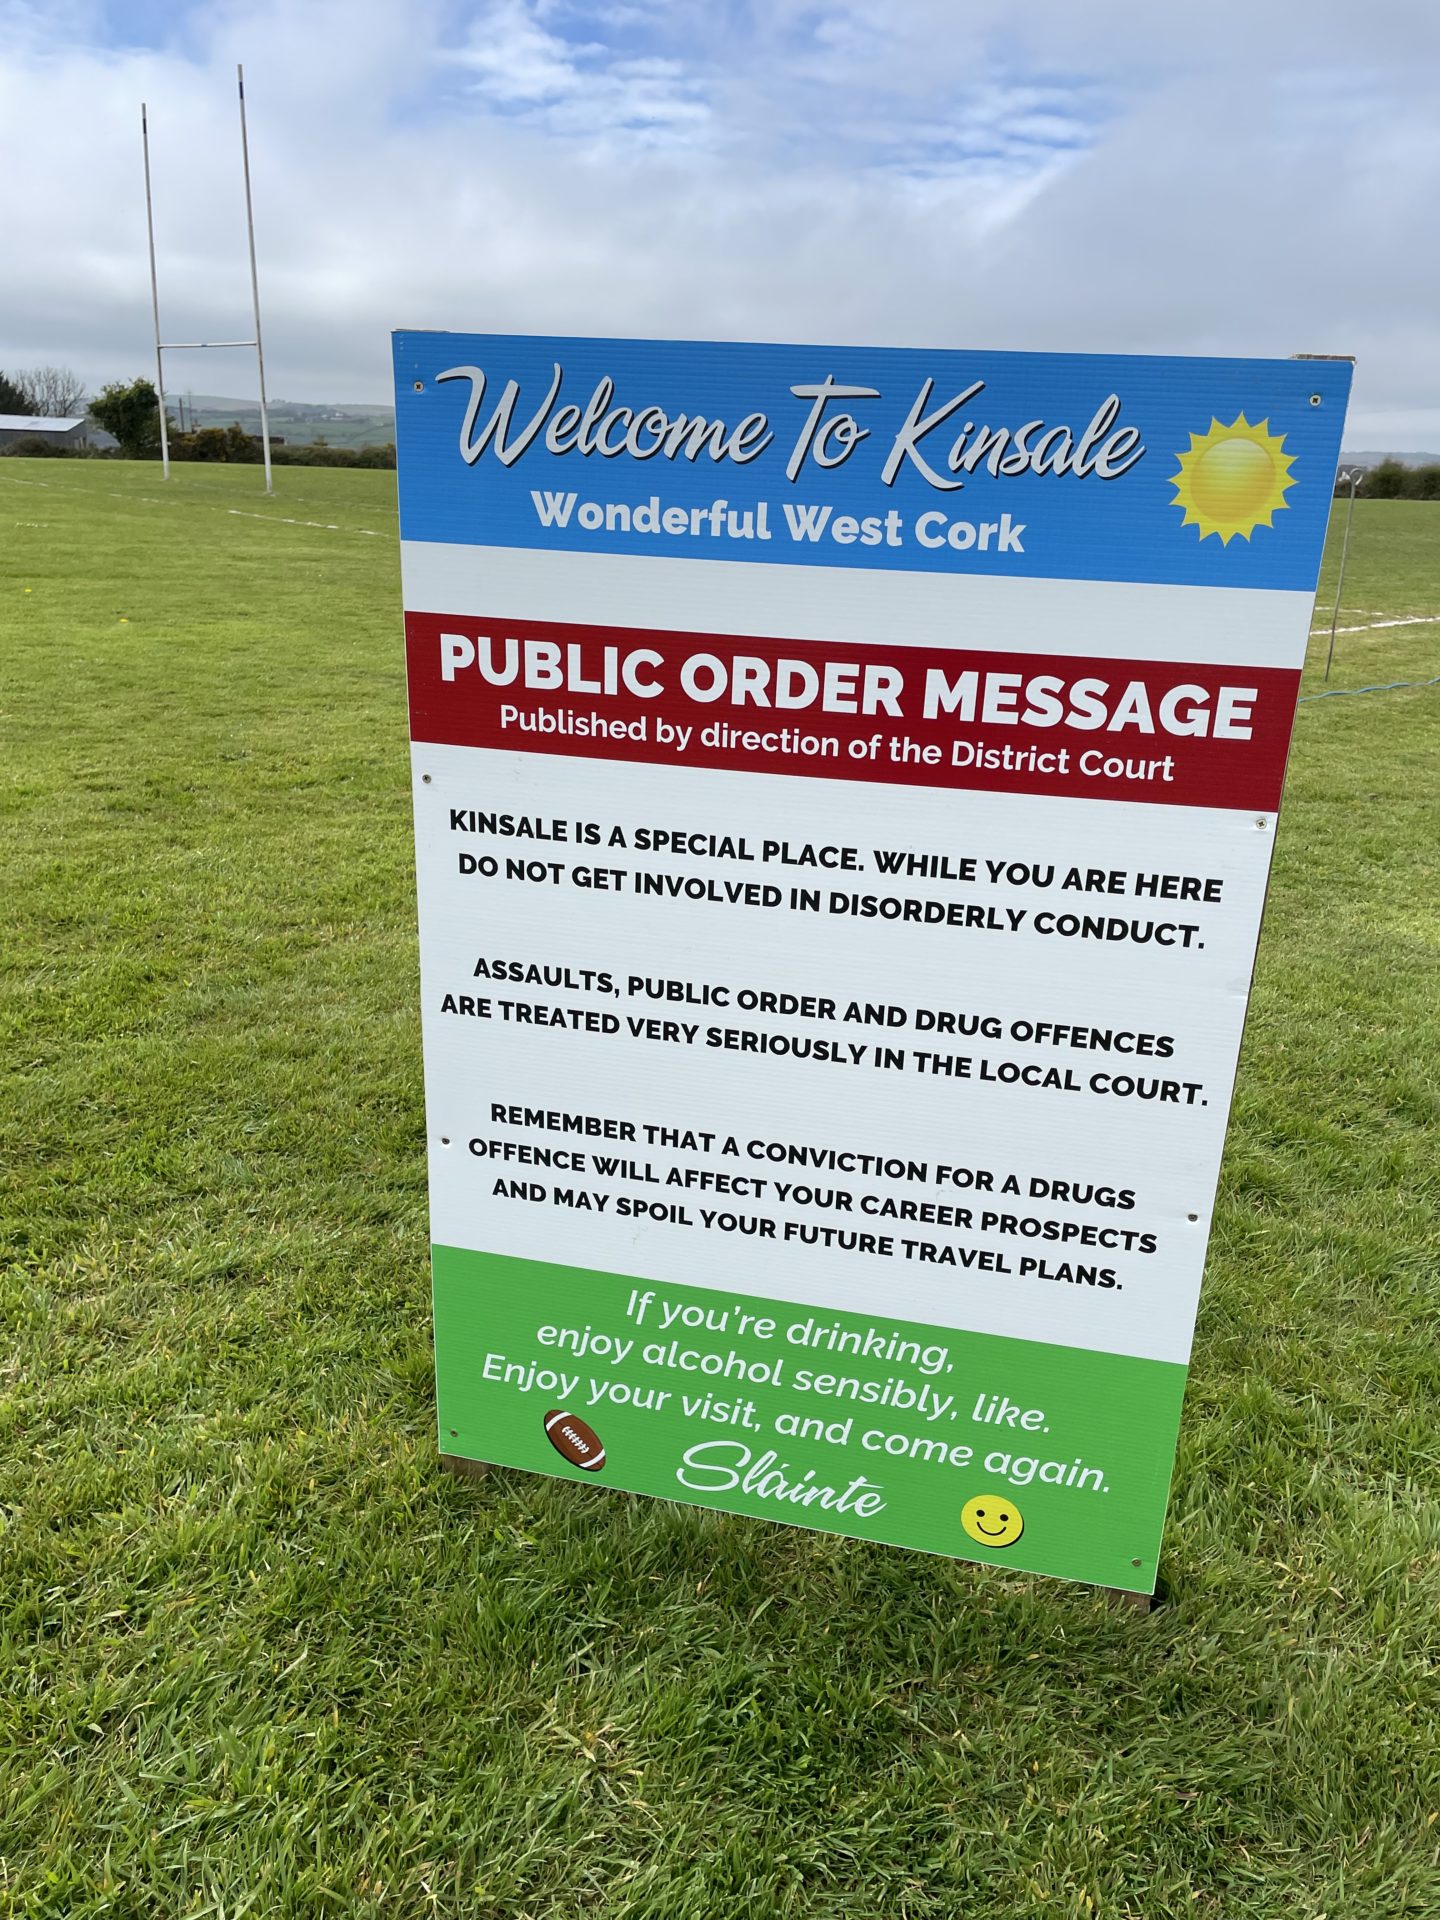 A sign warning against anti-social behaviour at the Kinsale Rugby 7s.